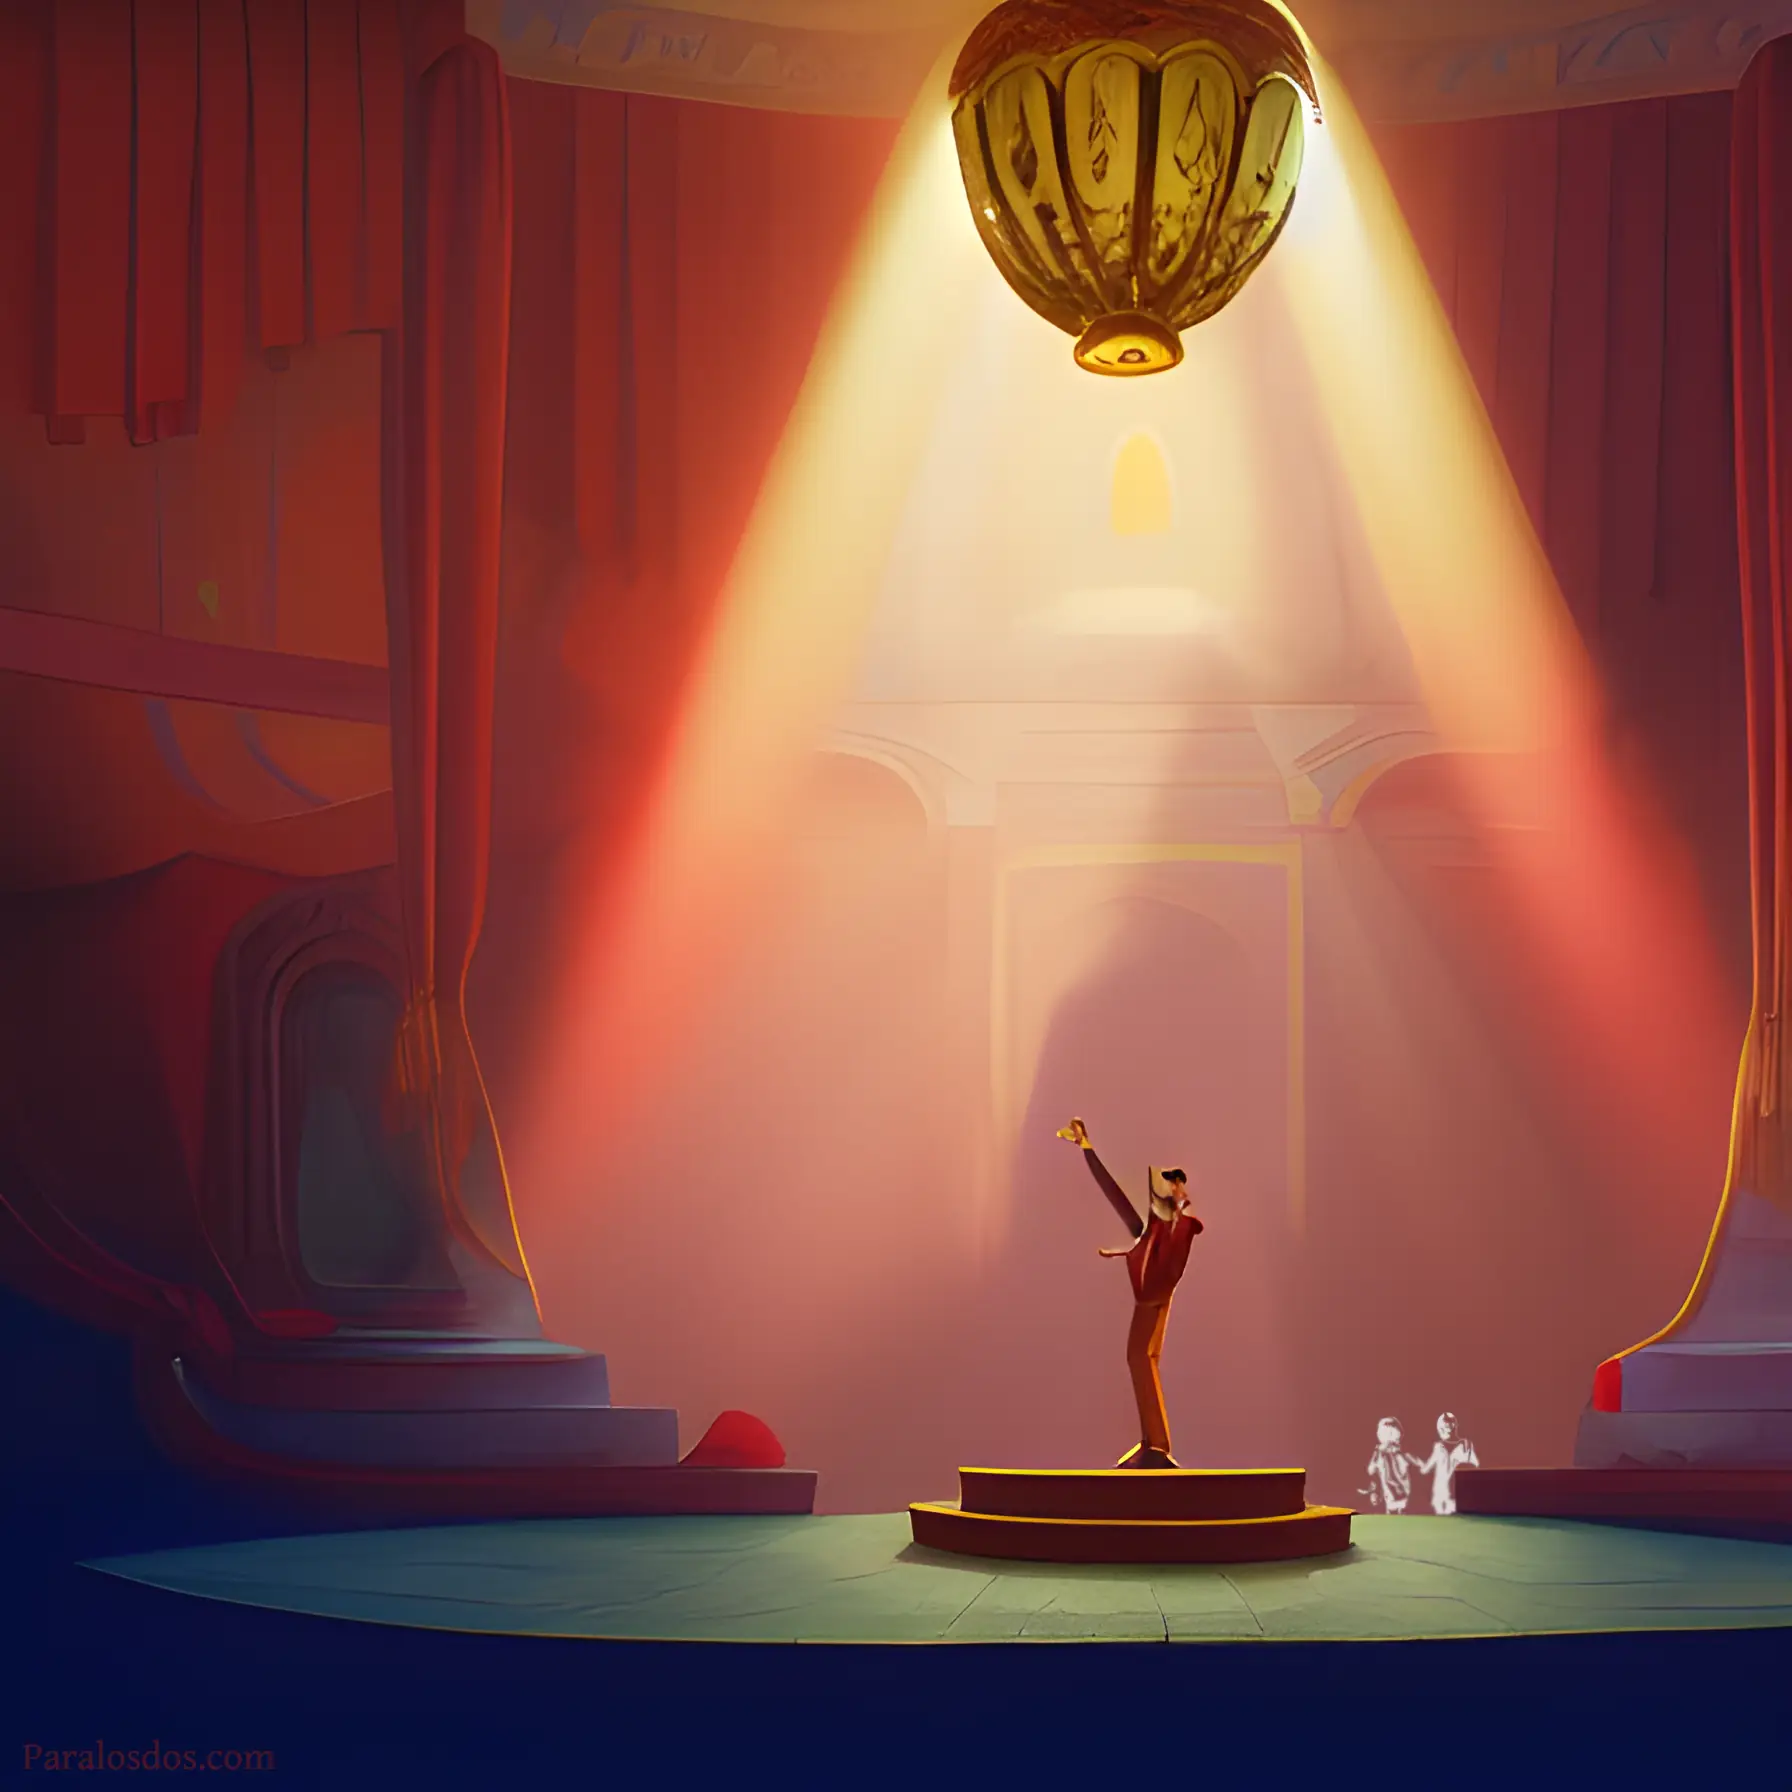 An artistic rendering of a figure orating on a stage in the spotlight.